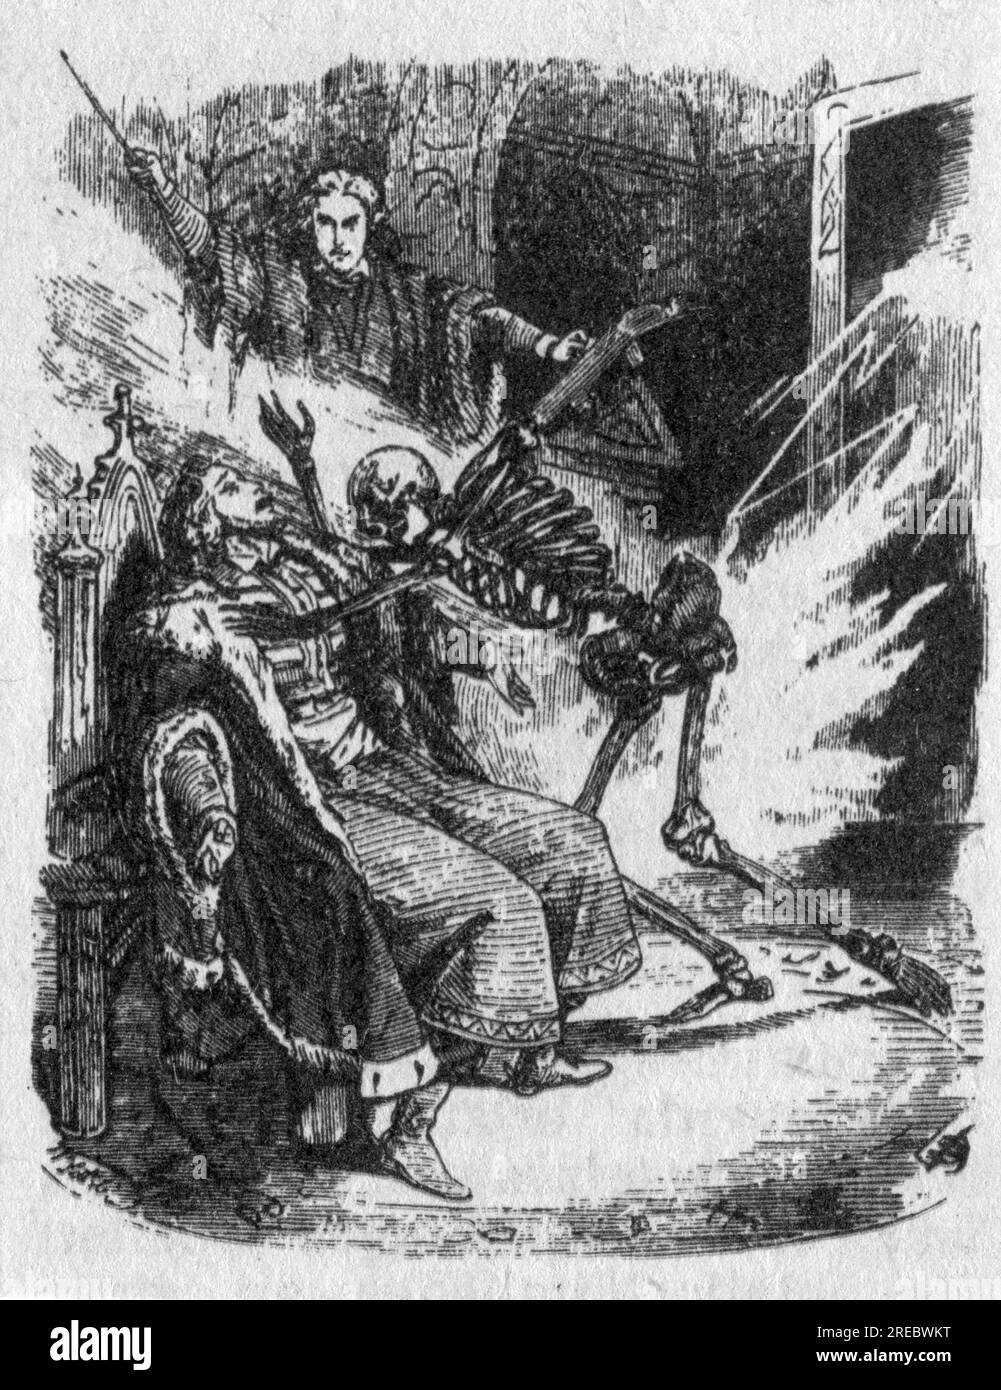 Pan Tvardovsky, Polish legendary figure, of the Polish Faust, invoking the spirits, wood engraving, ARTIST'S COPYRIGHT HAS NOT TO BE CLEARED Stock Photo